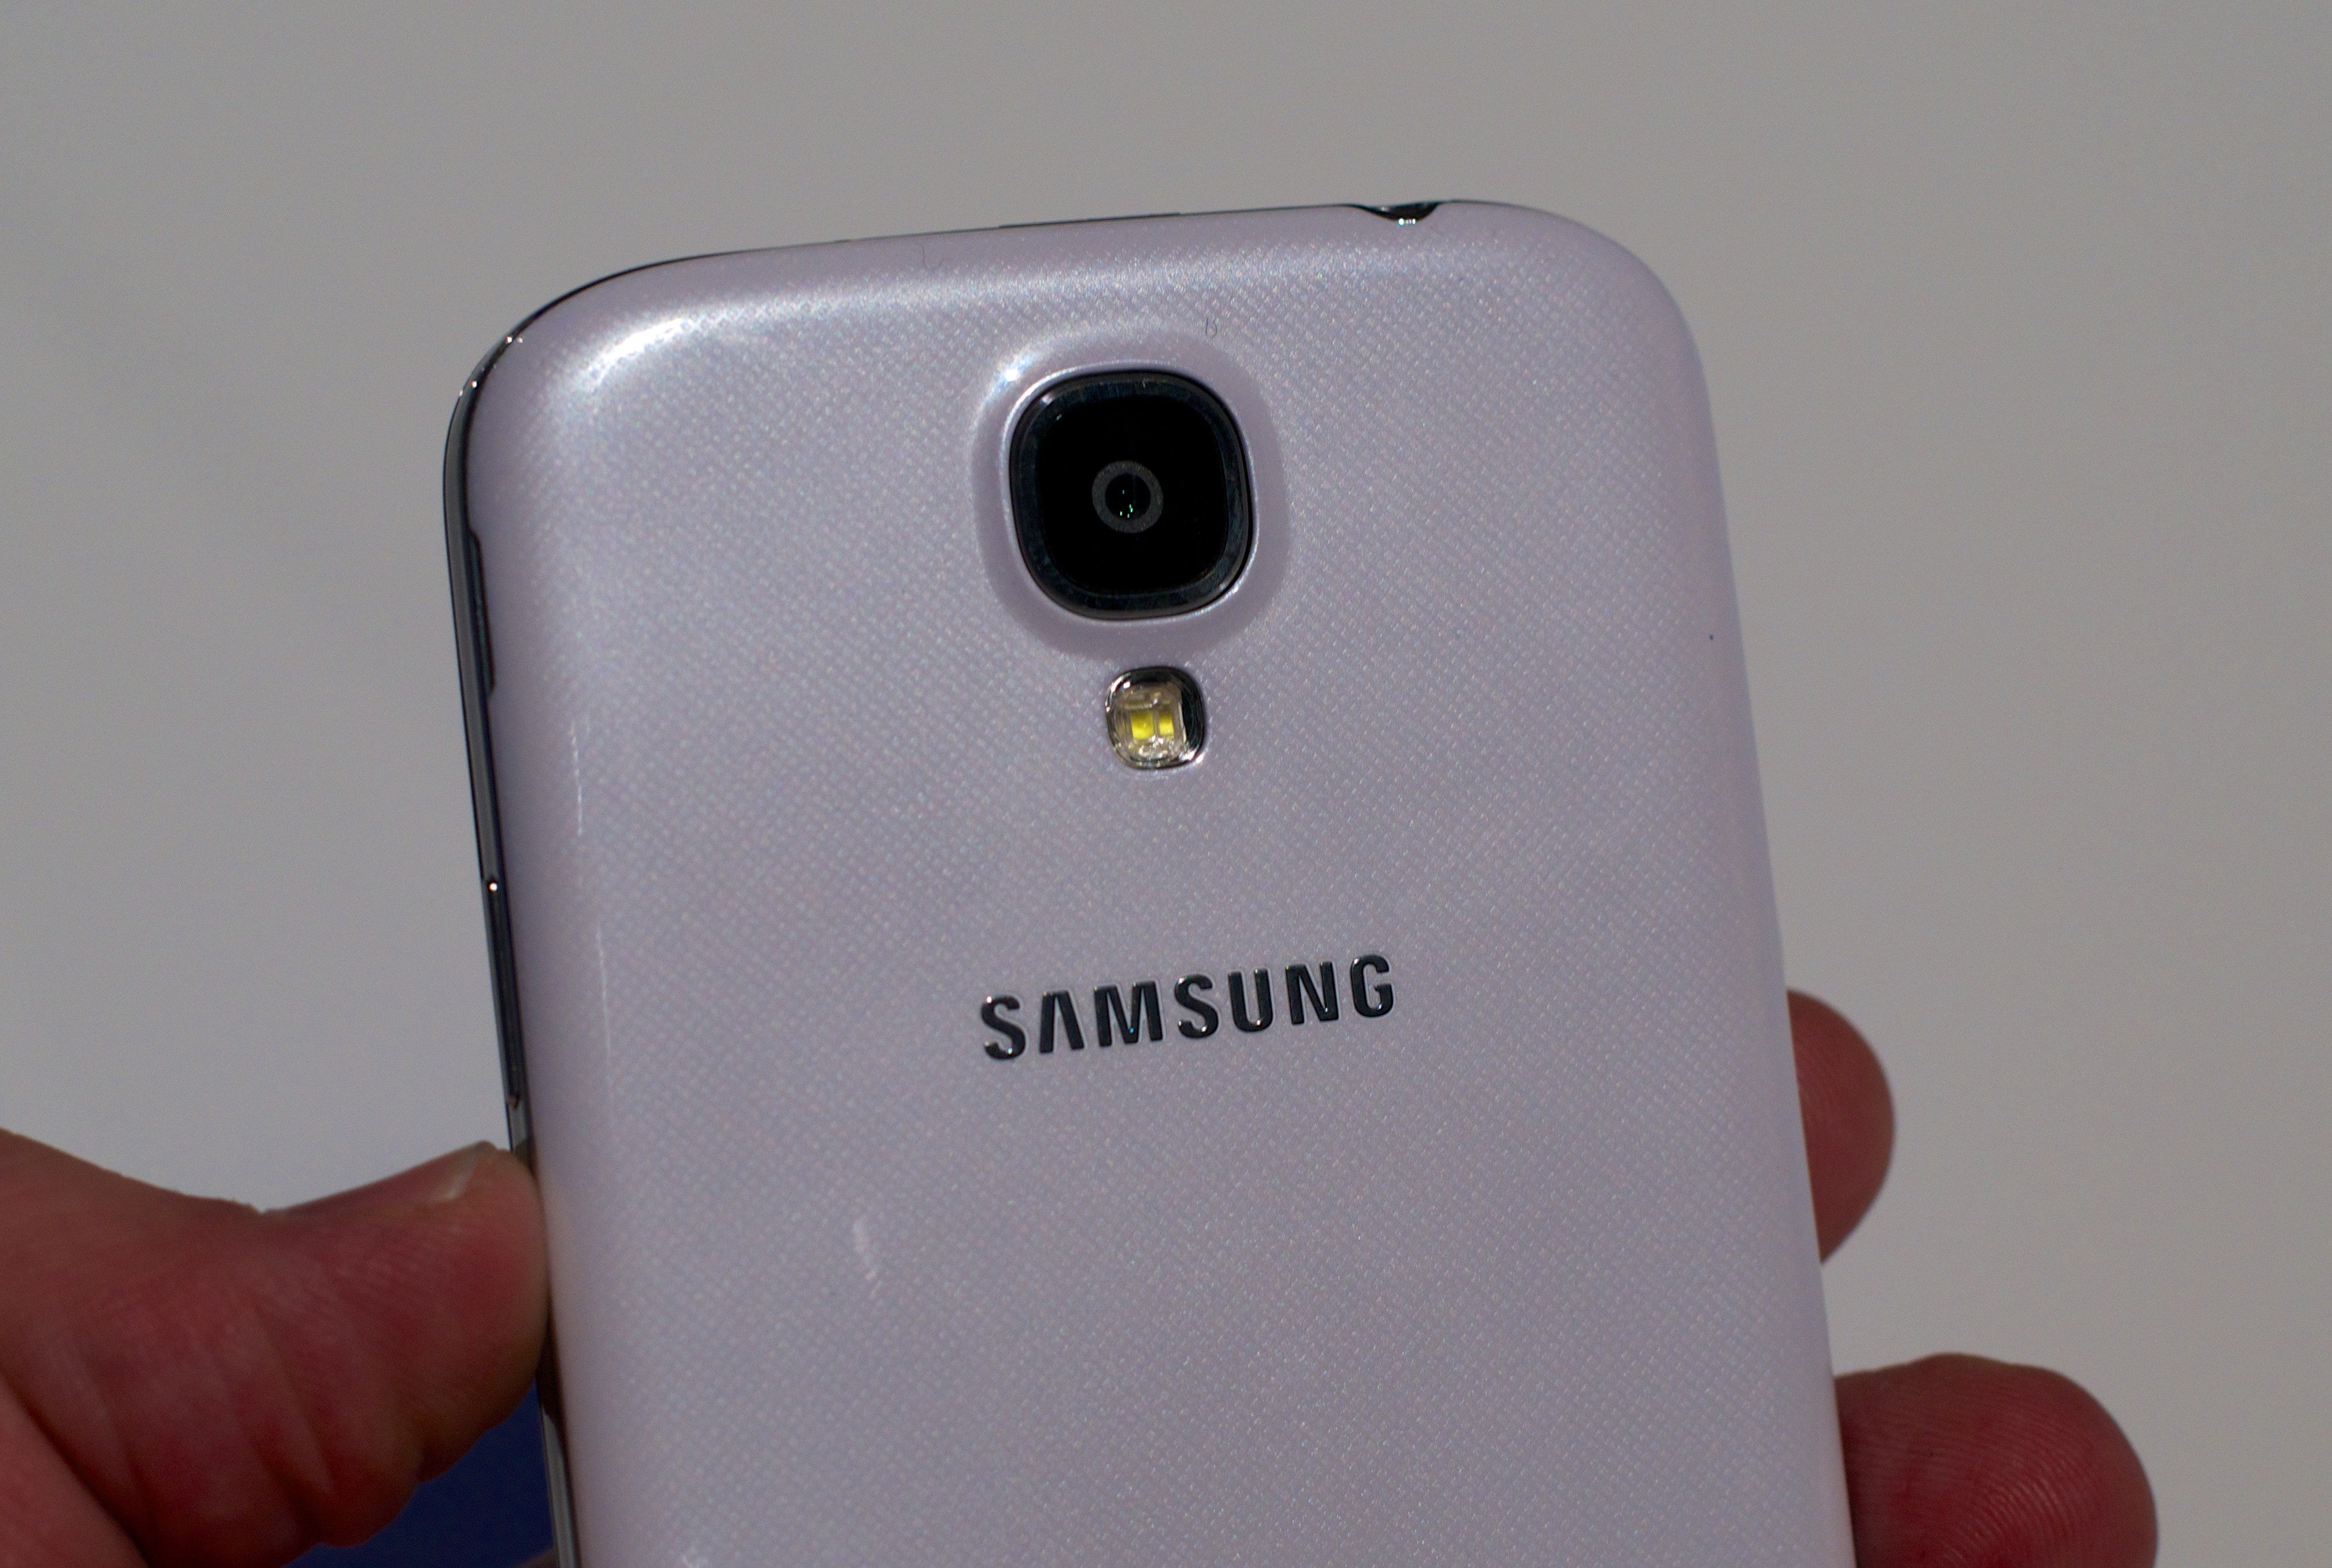 The Samsung Galaxy S4 does not capture FHD video at 60fps - Qualcomm admits error on Samsung Galaxy S4 video capture specs